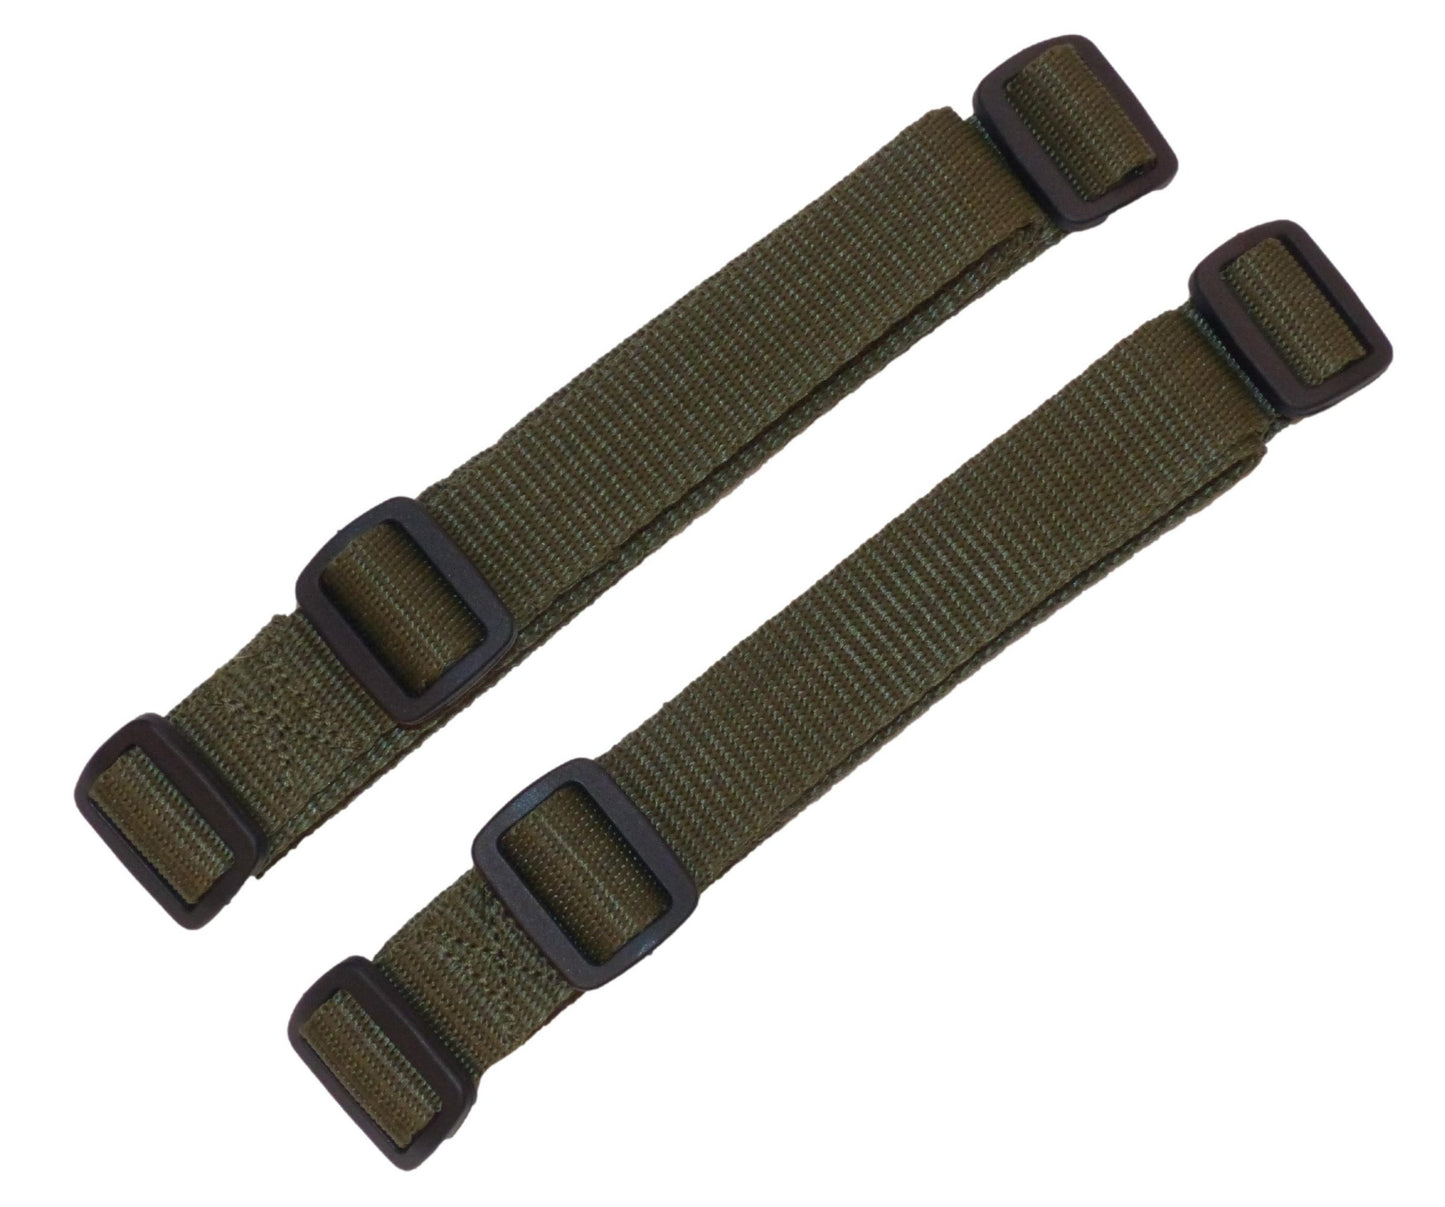 Benristraps 25mm Webbing Straps with Triglides, 1 Metre in olive green